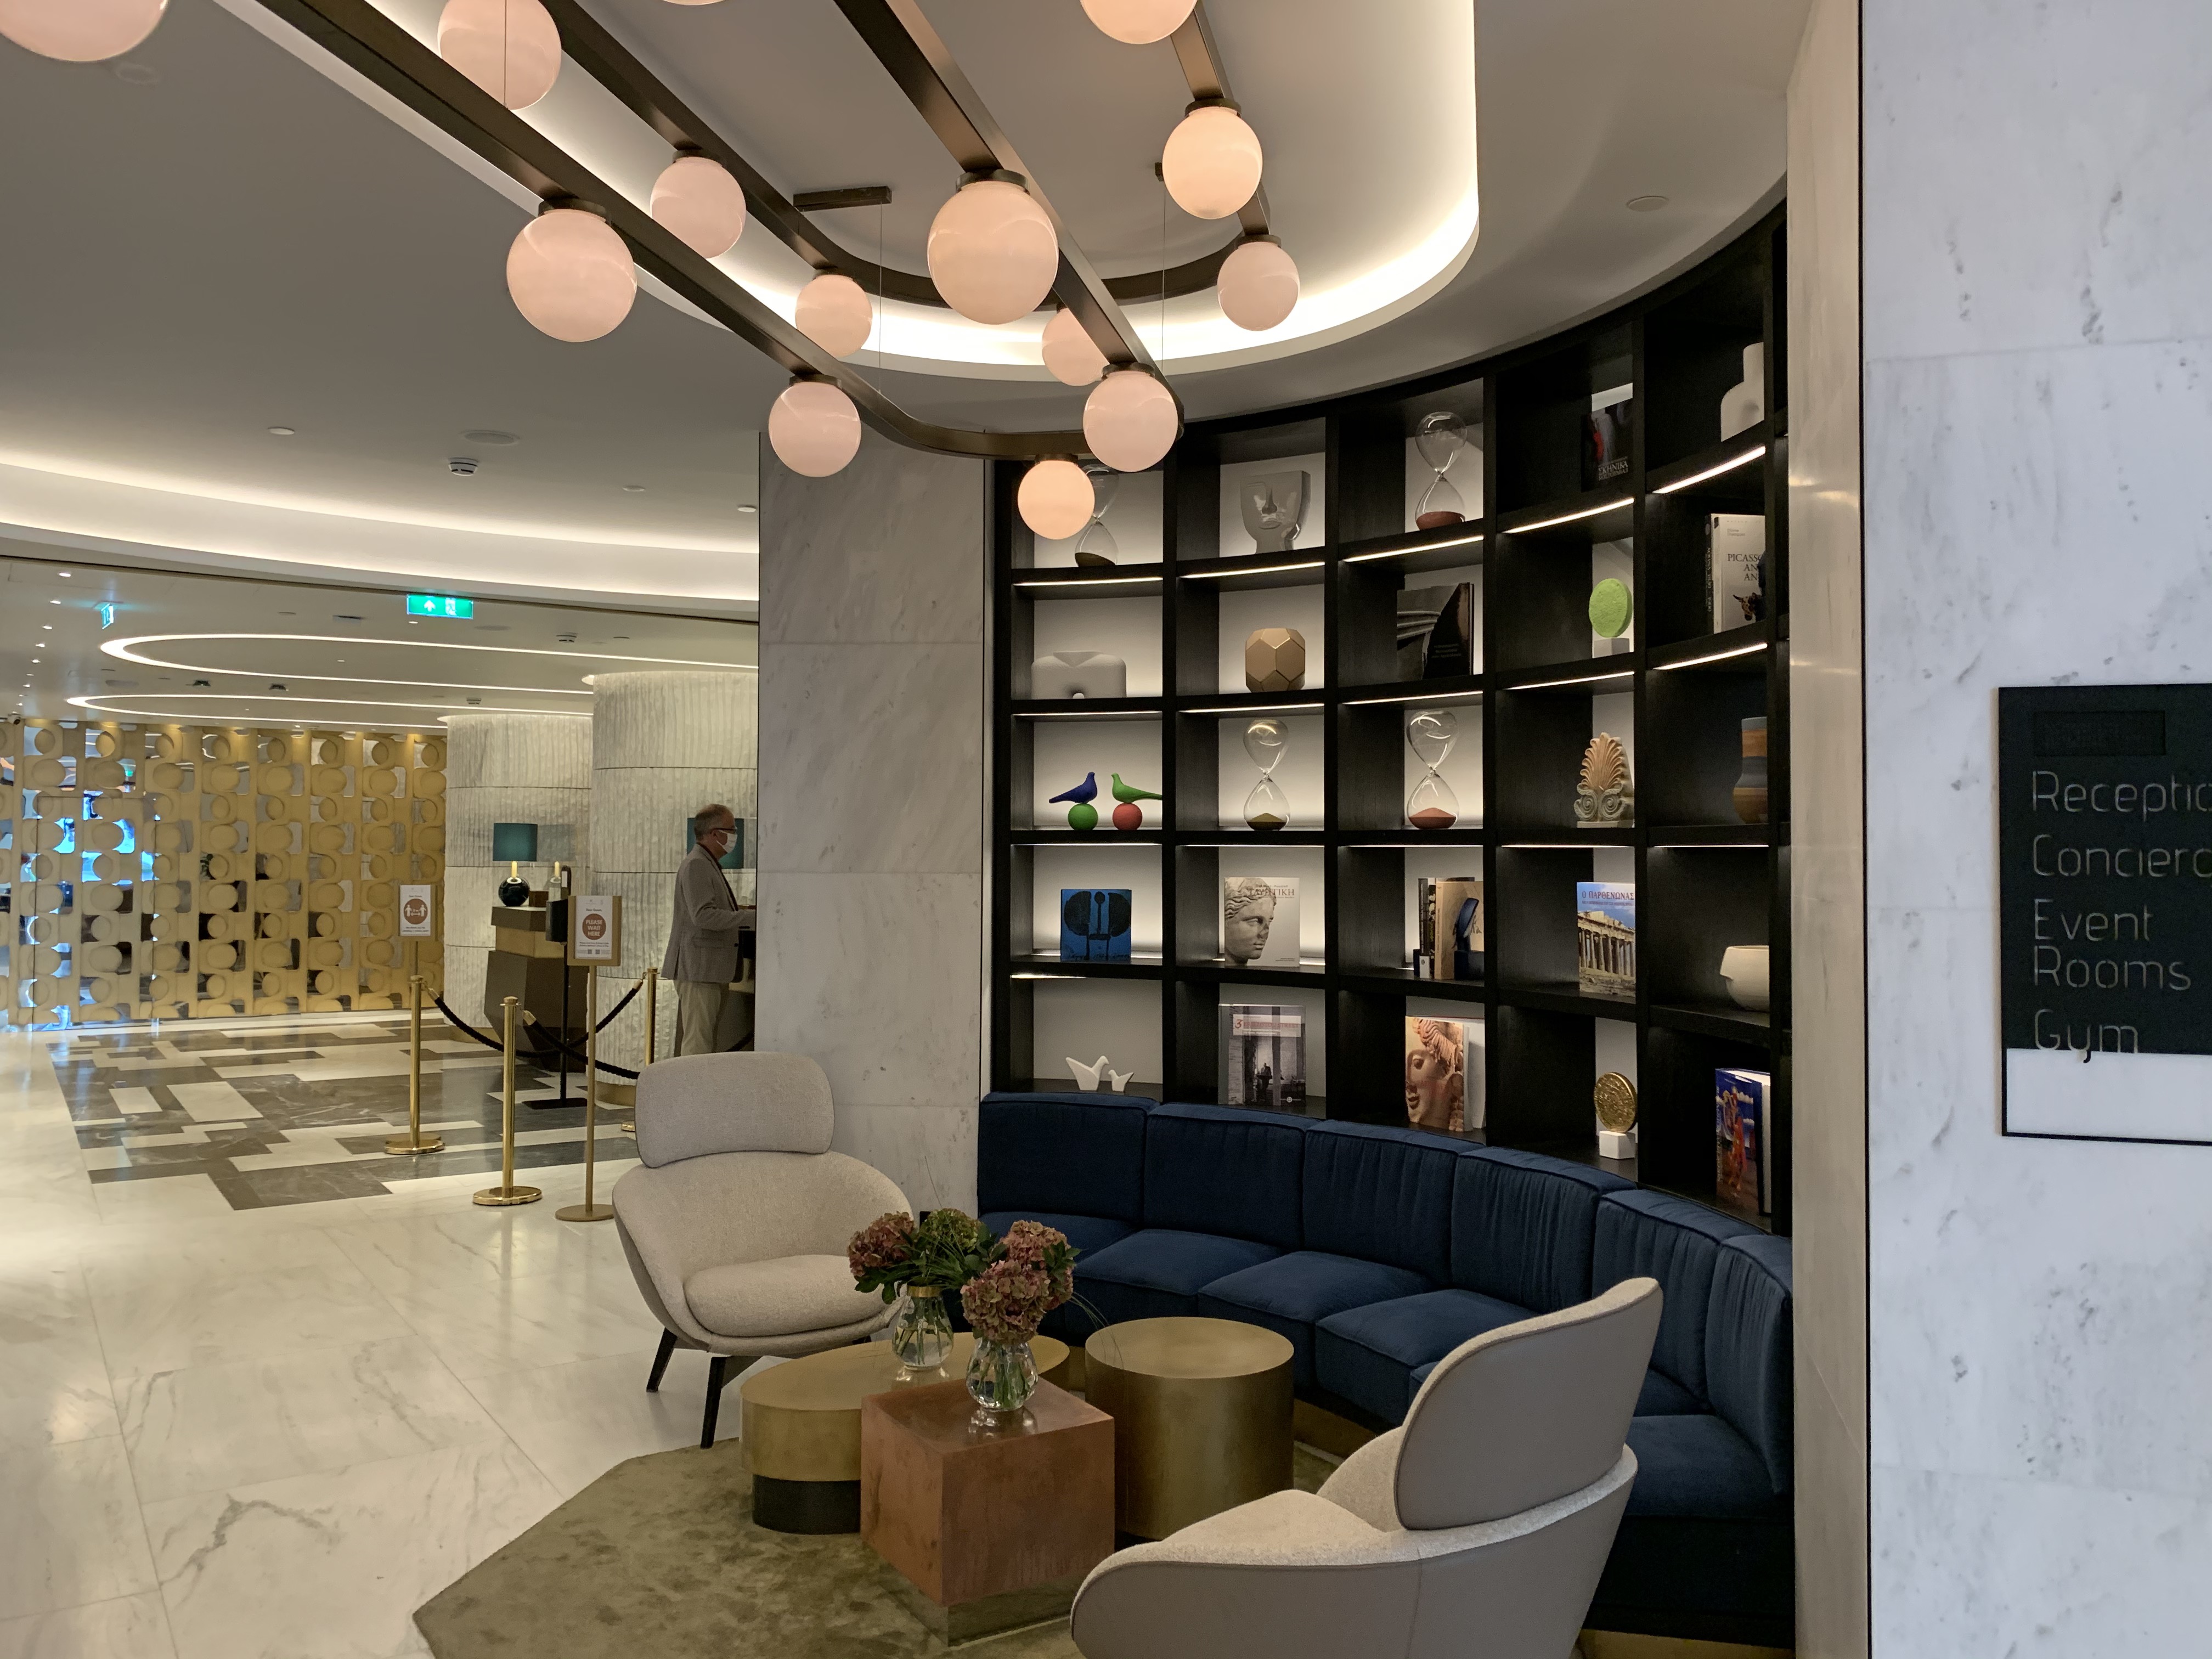 Athens Capital Hotel – MGallery Collection - She Travel Club